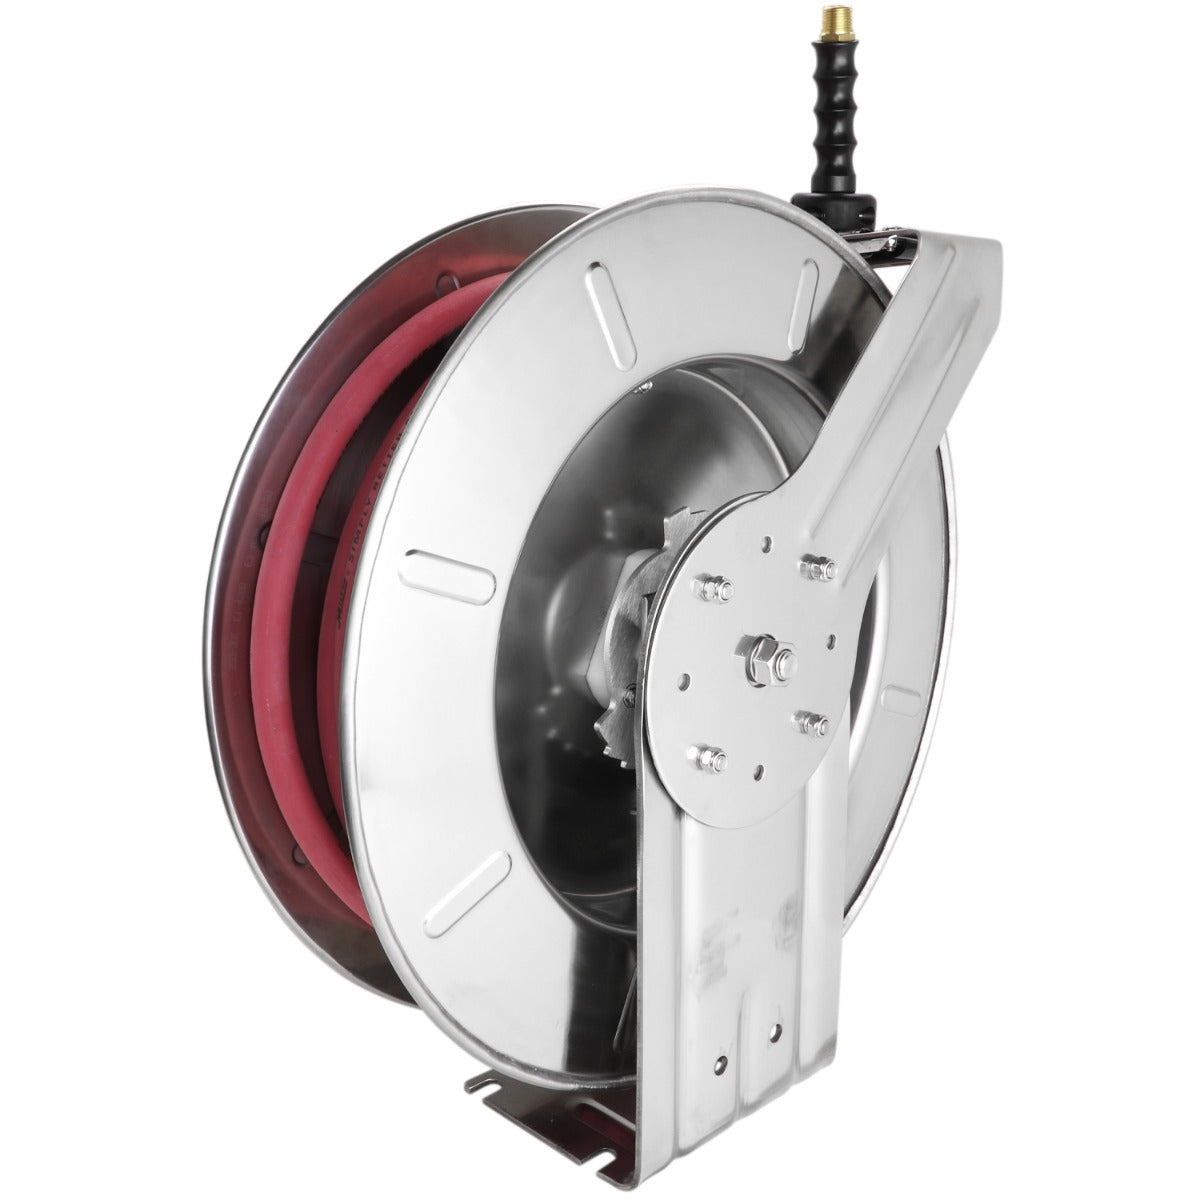 Milton Stainless Steel Hose Reel Retractable, 1/2 ID x 25' Ultra